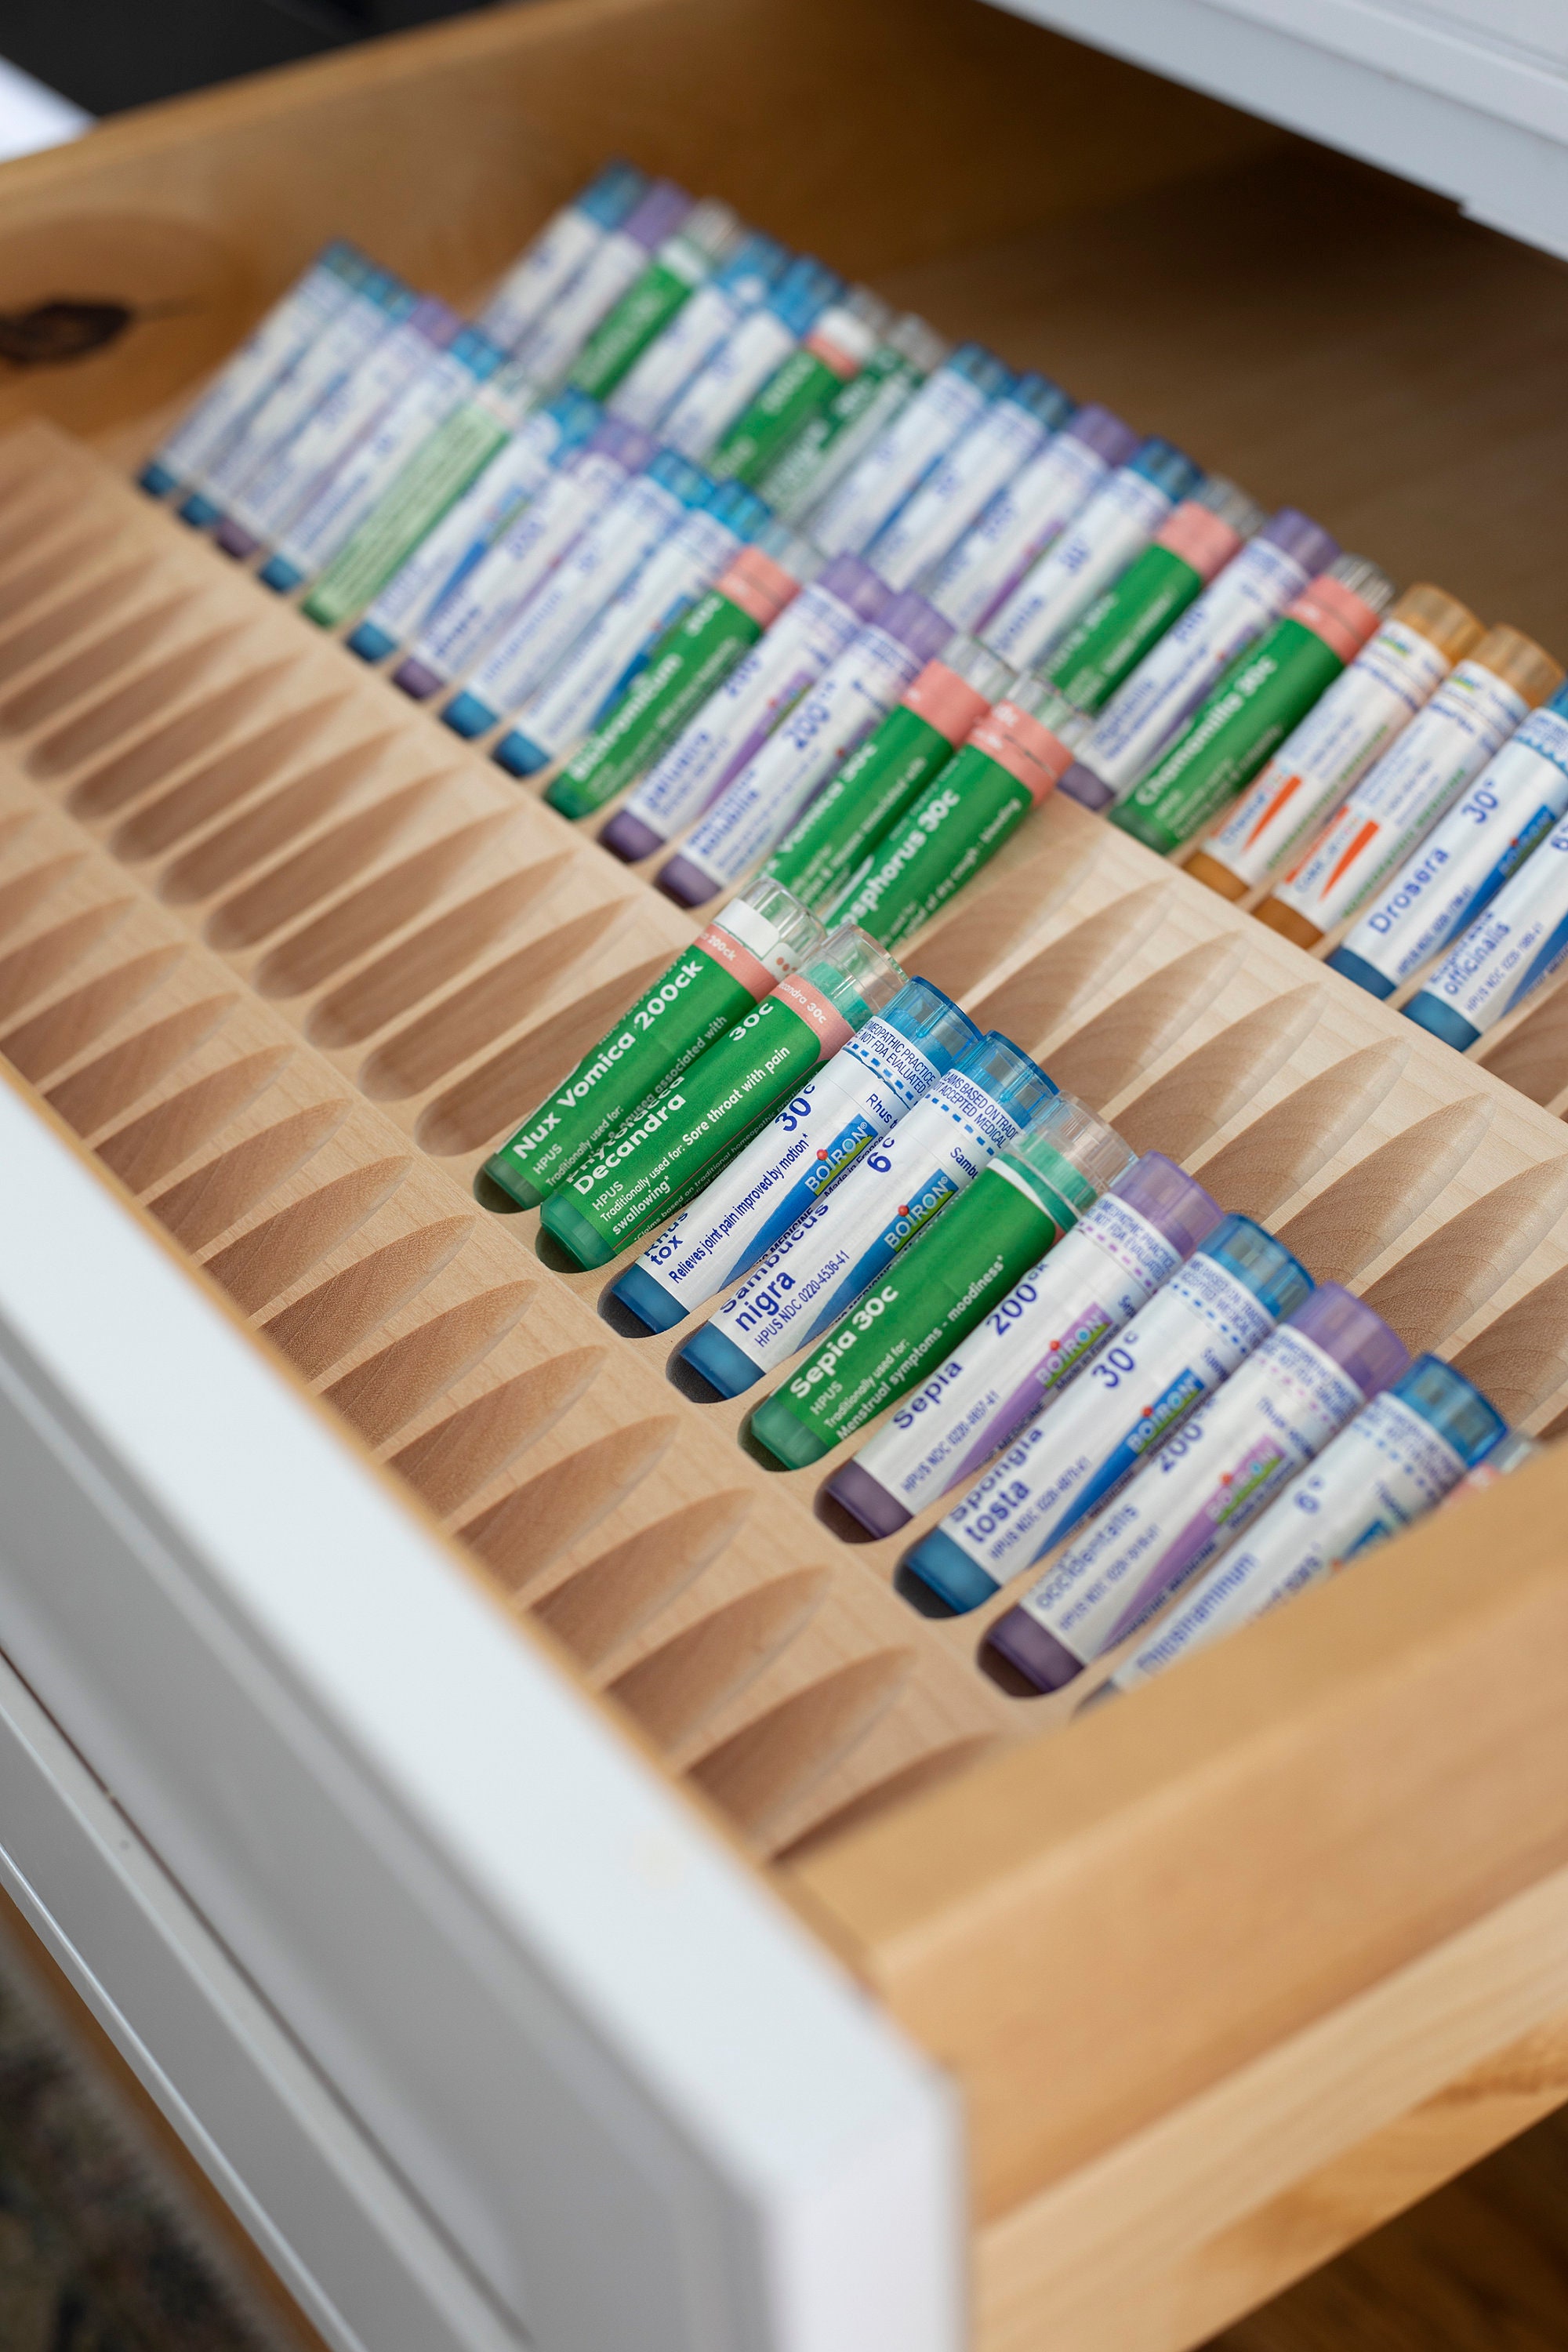 Boiron Convenient Storage My Home Kit Organized Homeopathy for Everyday